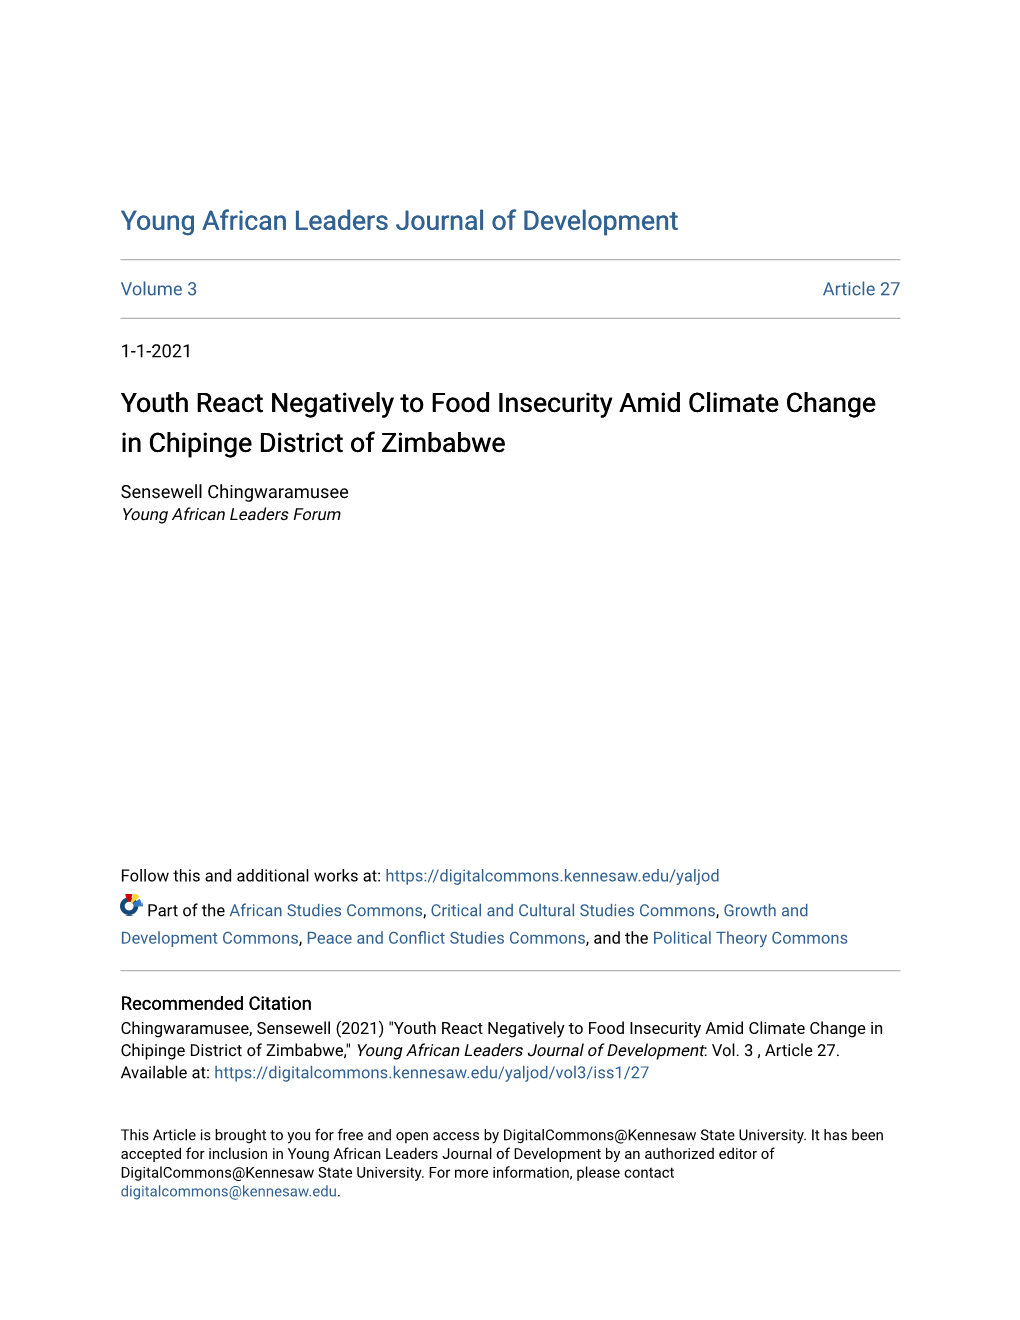 Youth React Negatively to Food Insecurity Amid Climate Change in Chipinge District of Zimbabwe